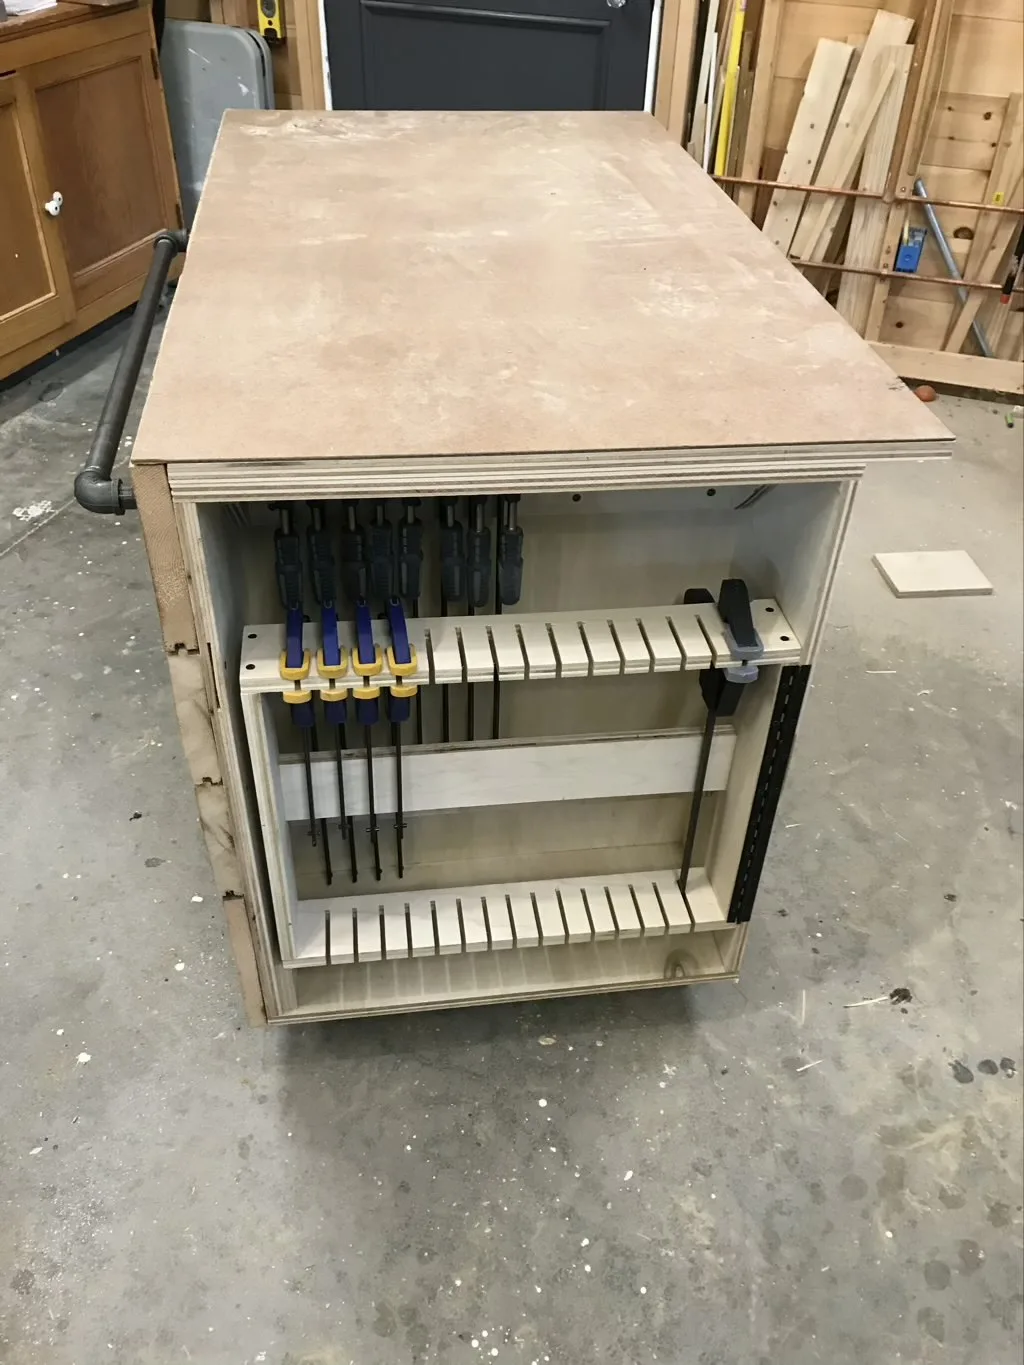 Clamp rack on assembly cart